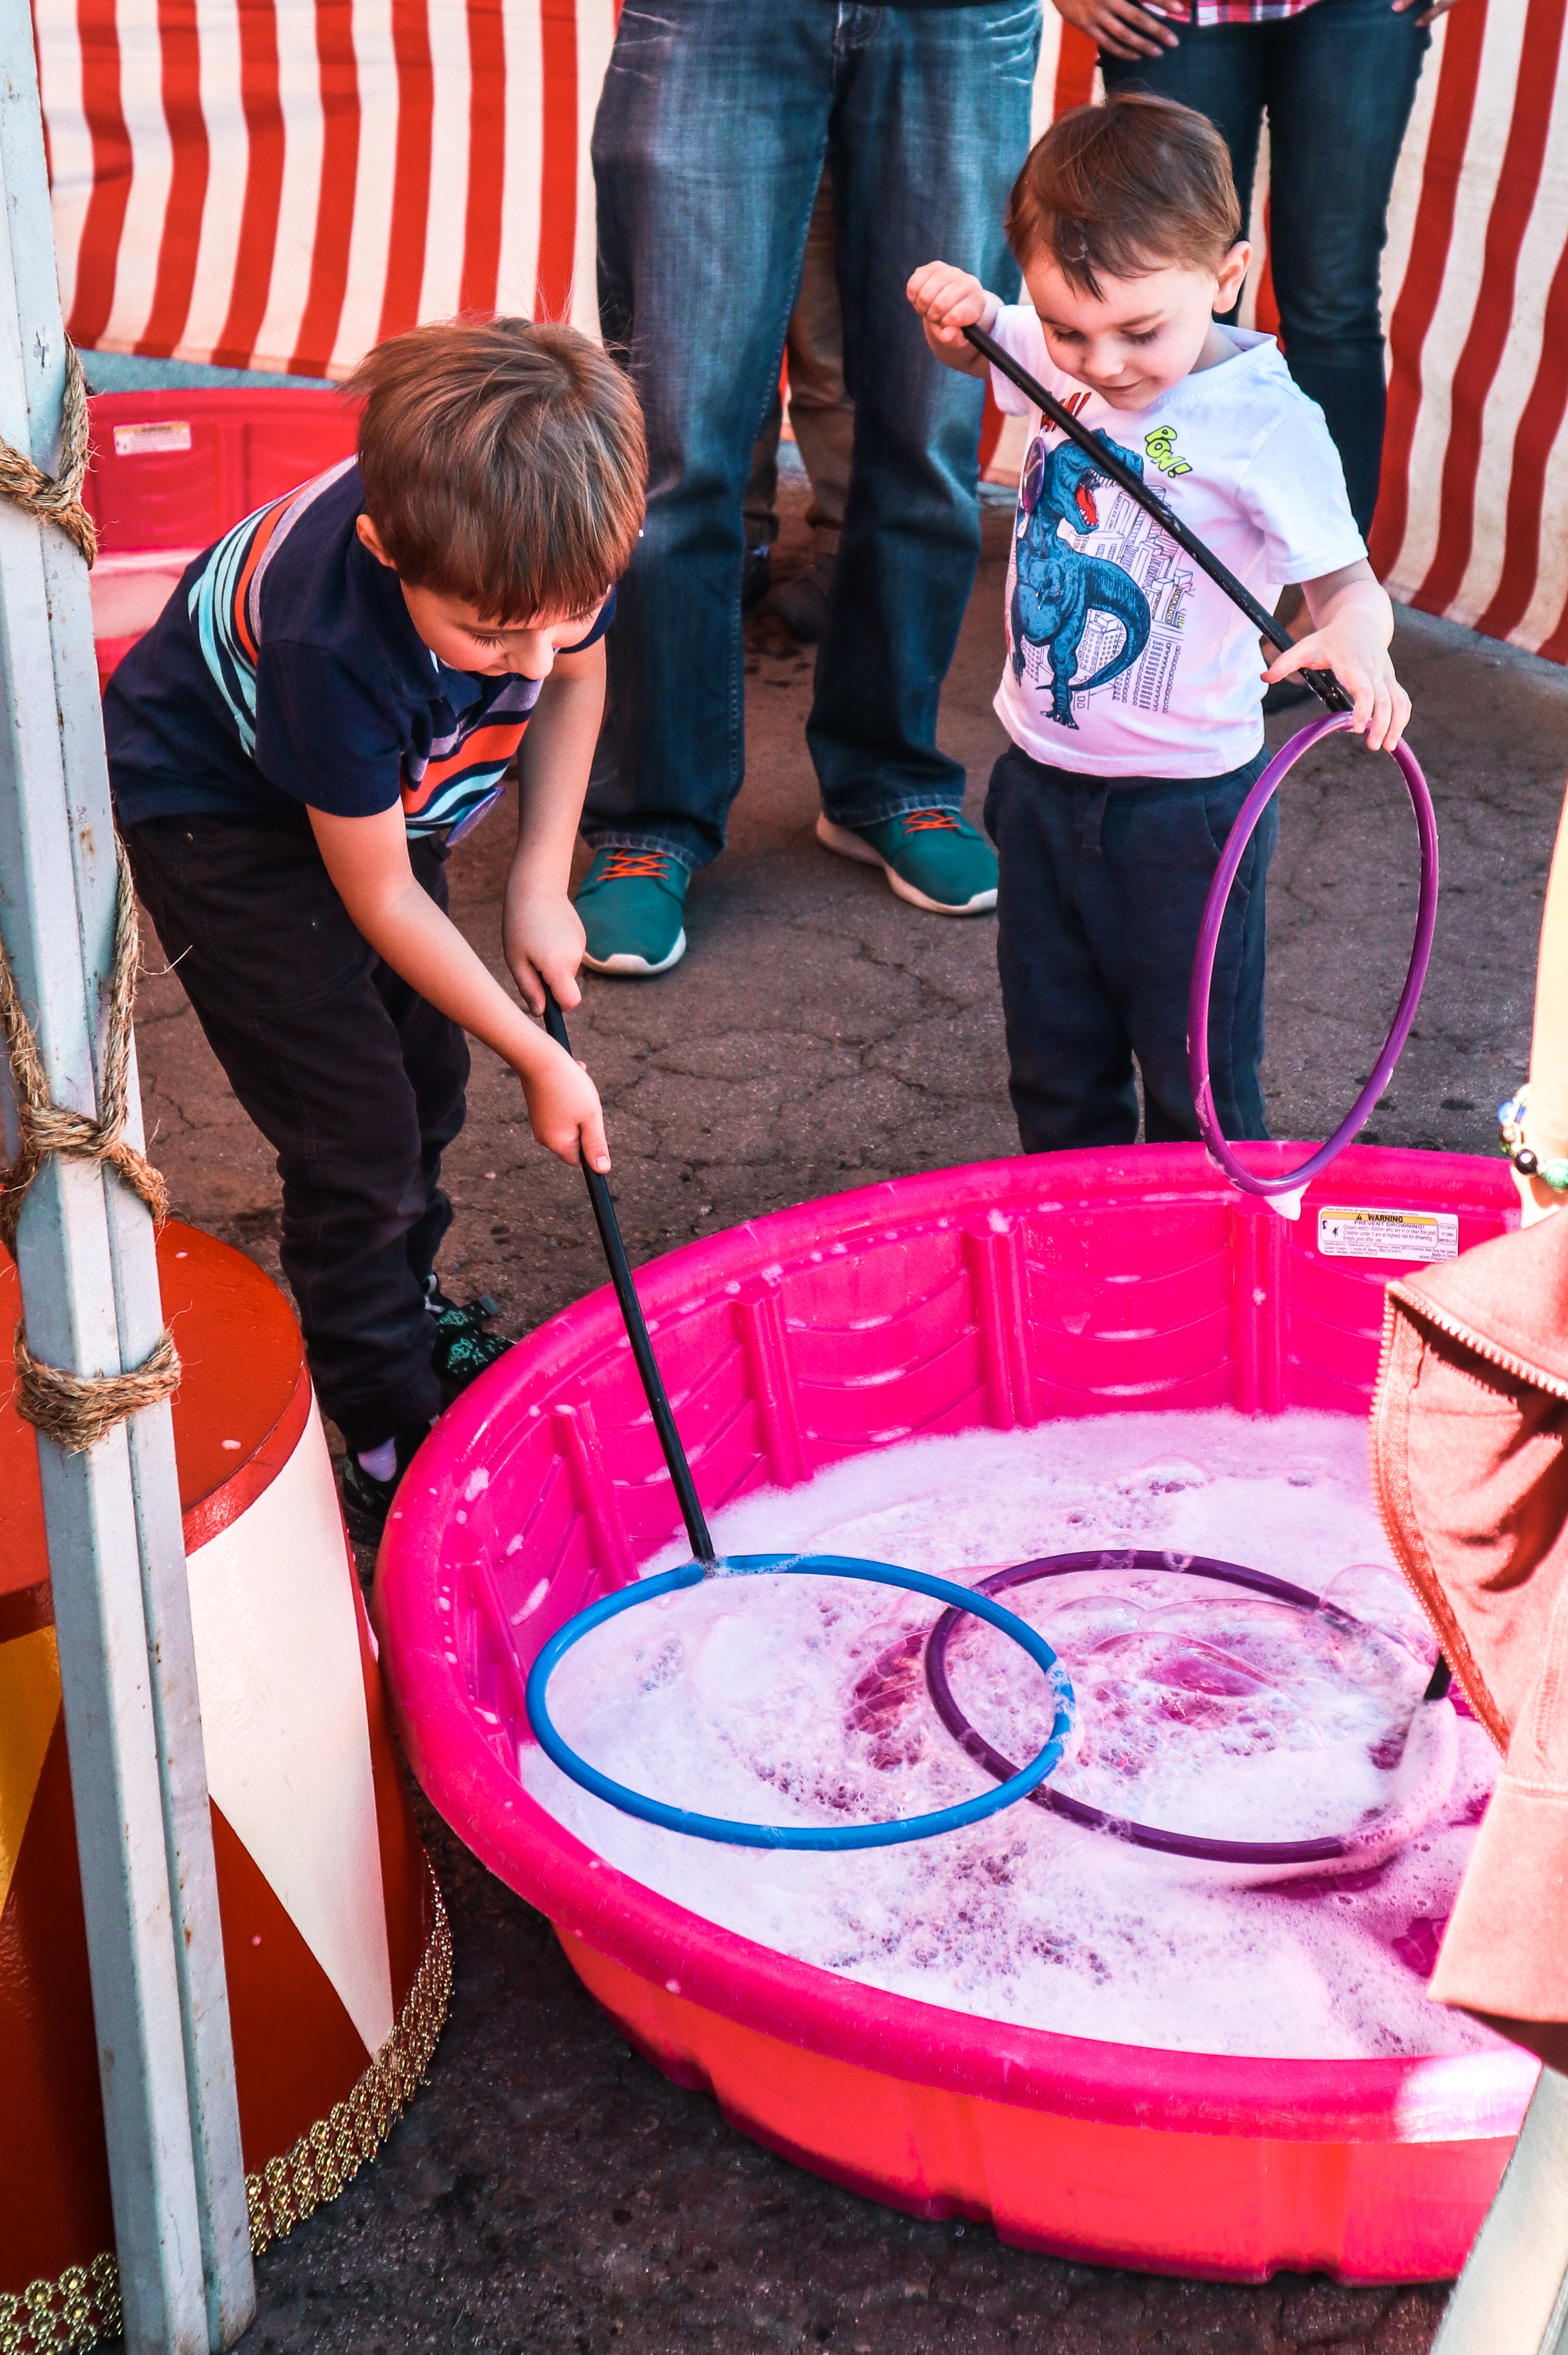 two little boys creating giant bubbles with wands in a red and white striped circus tent